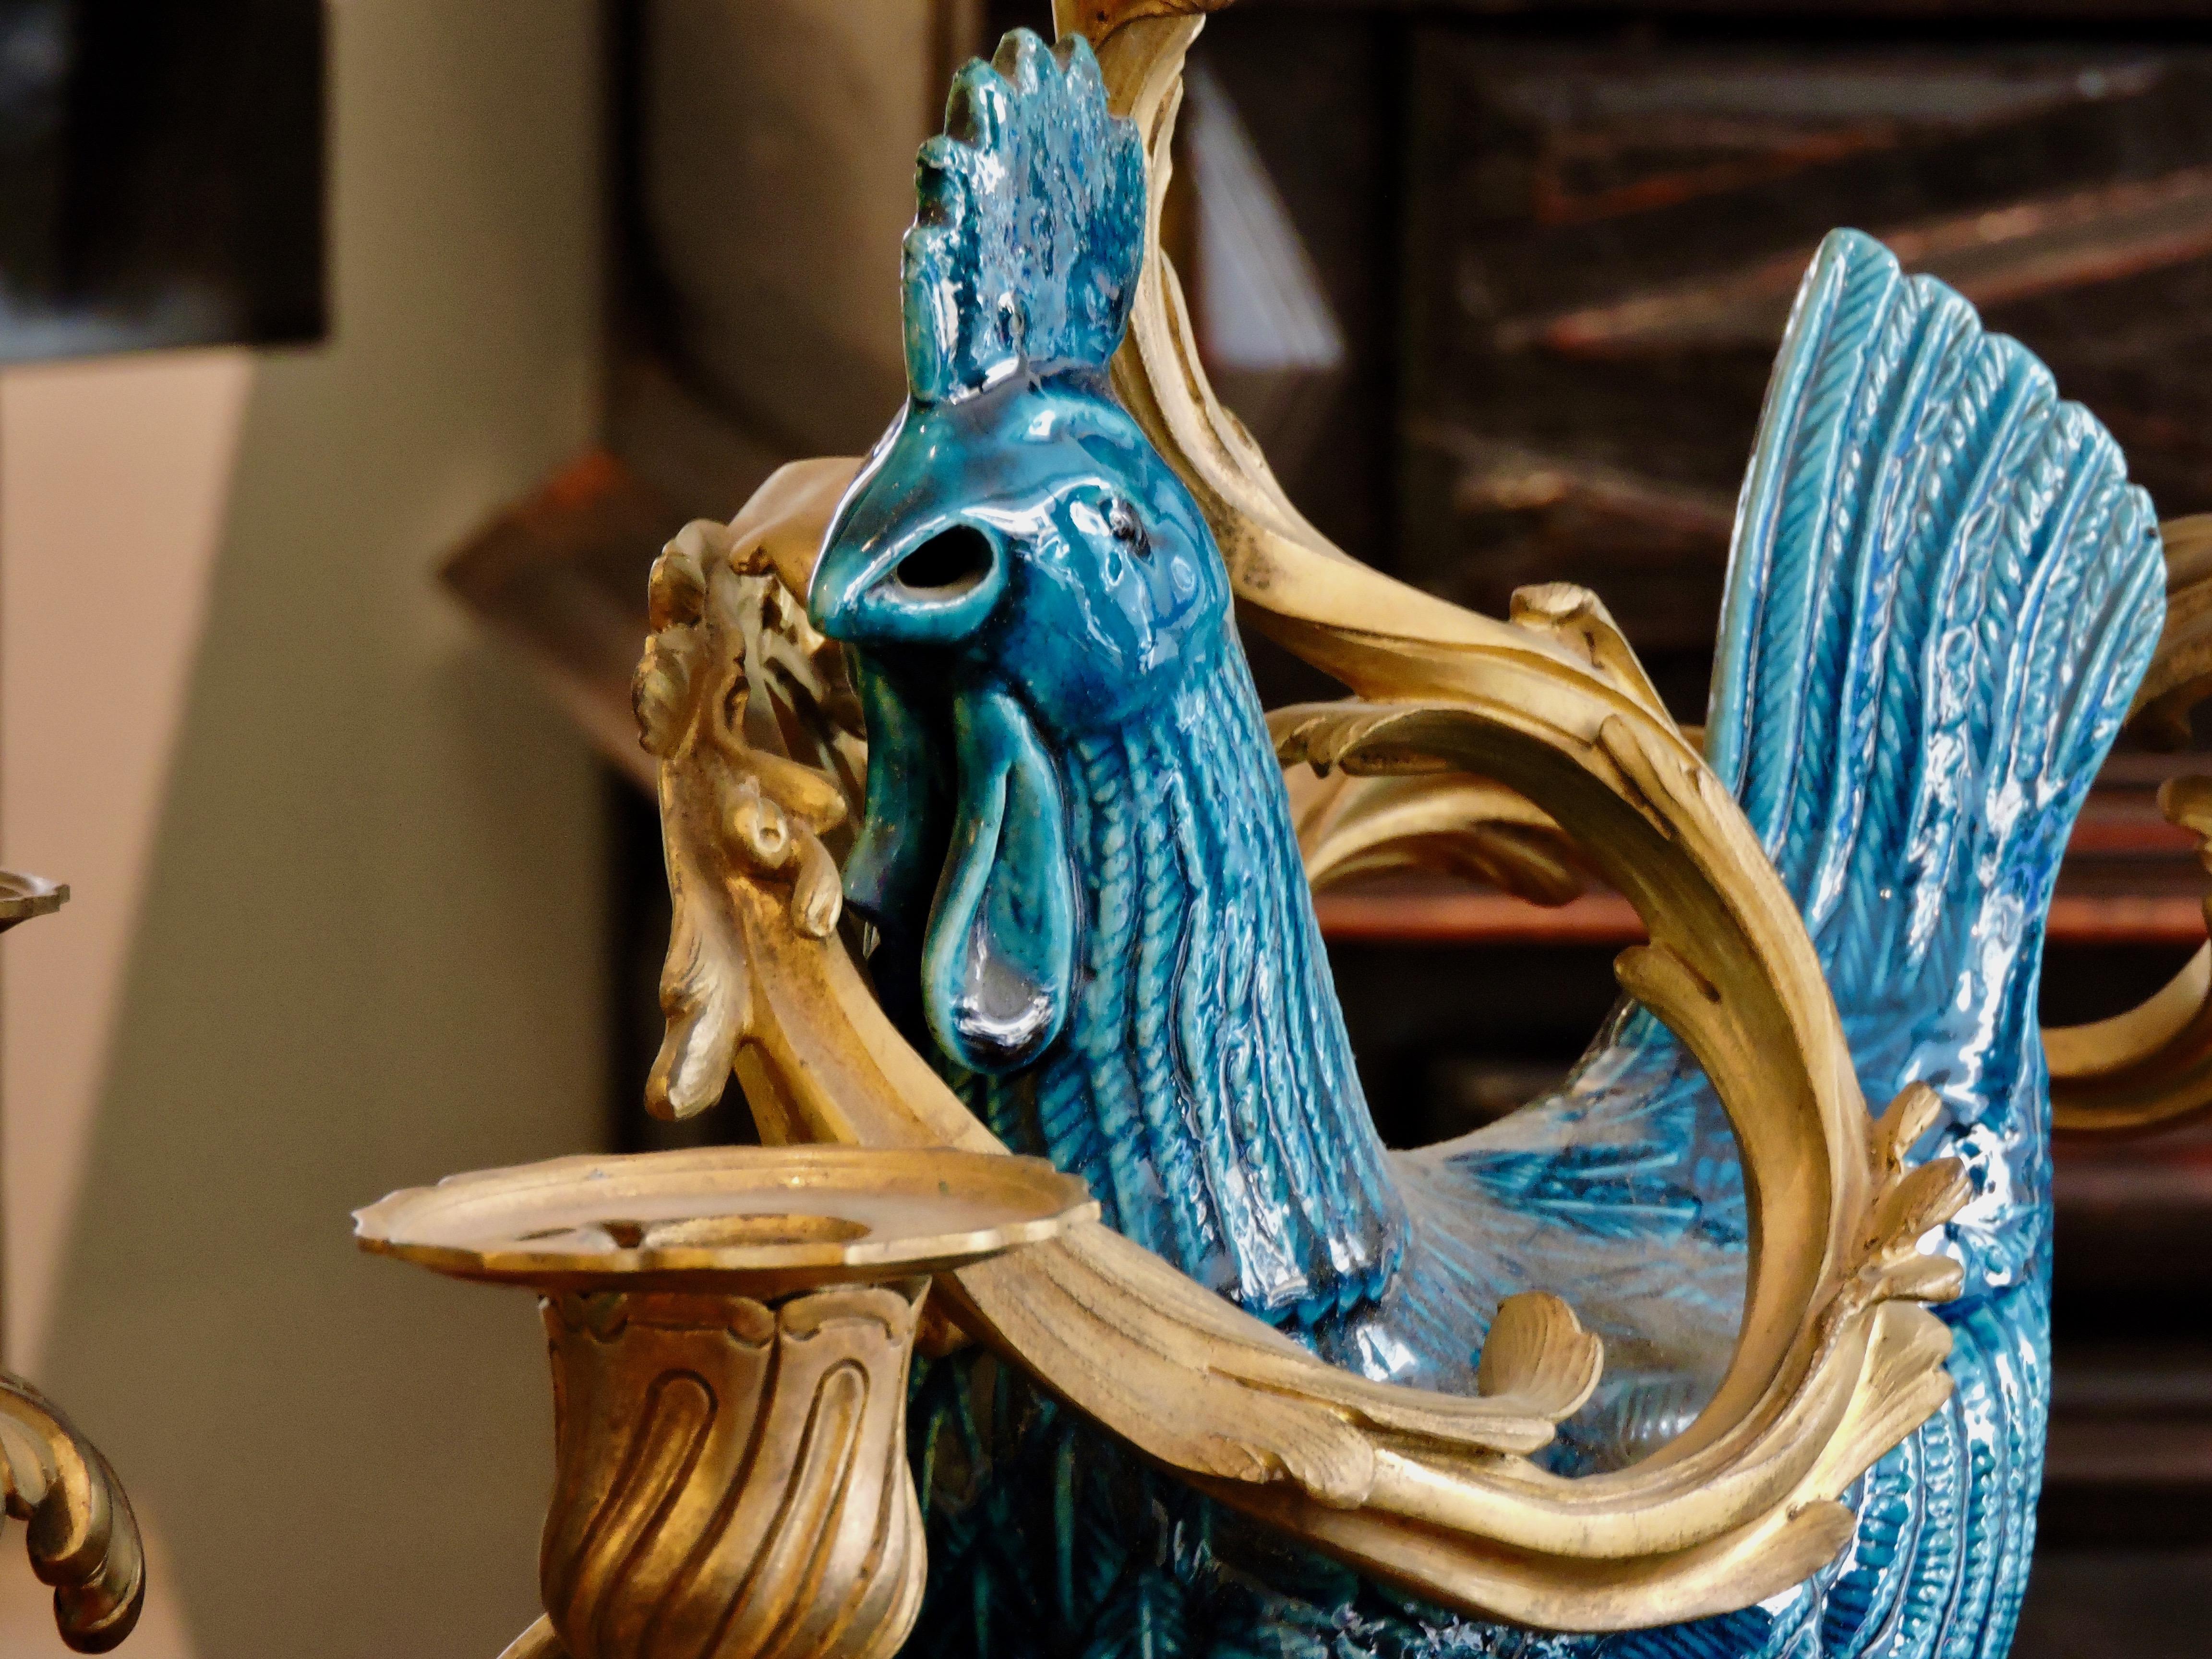 Late 19th Century 19th Century Pair of Blue Enameled Faience Roosters Ormolu-Mounted Candelabras